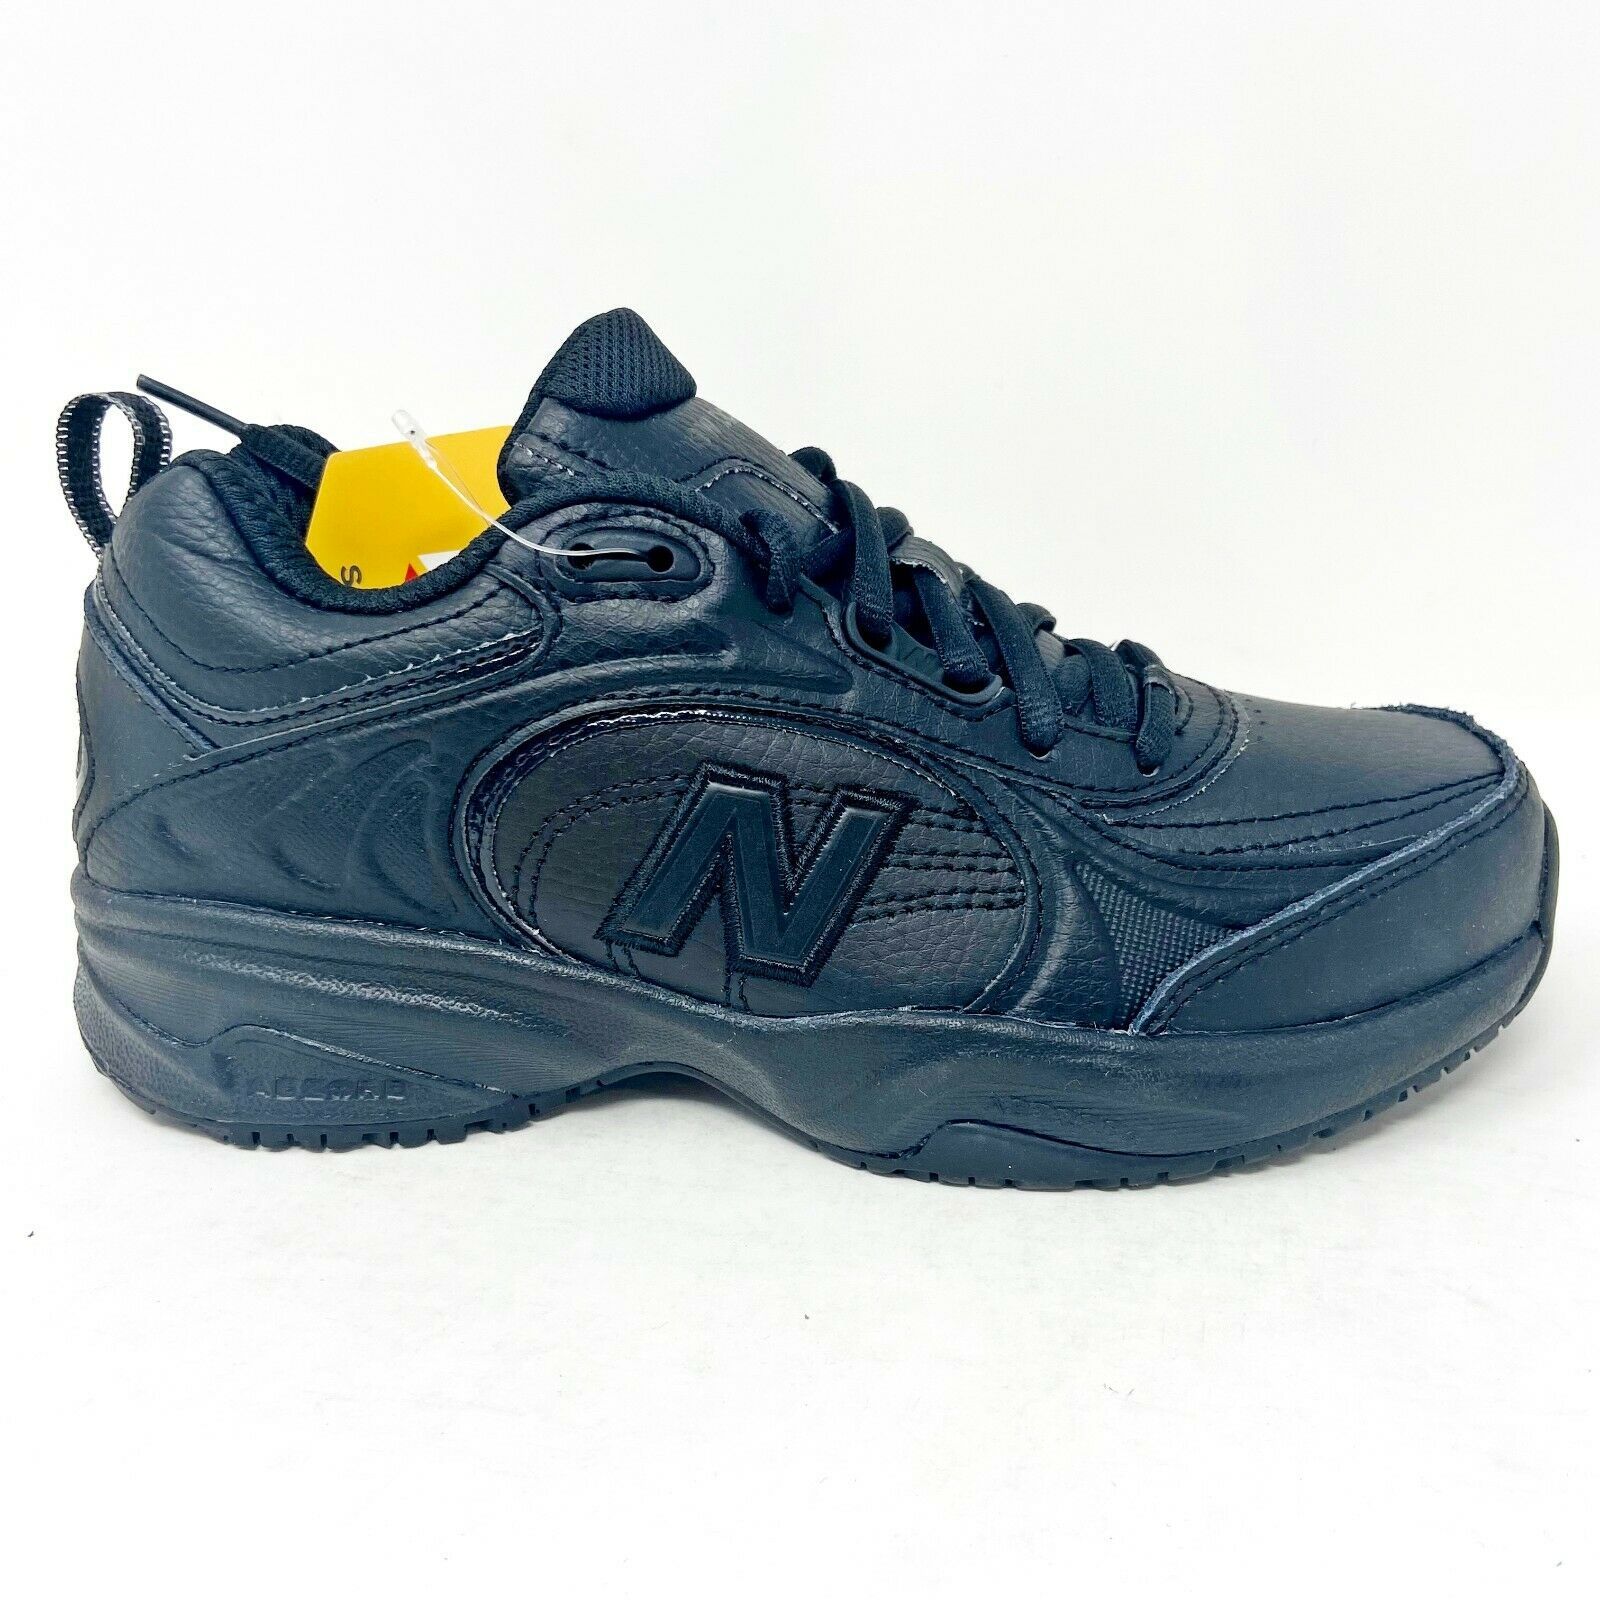 Primary image for New Balance 623 SG SureGrip Slip Resistant Memory Foam Black Womens Work Shoes